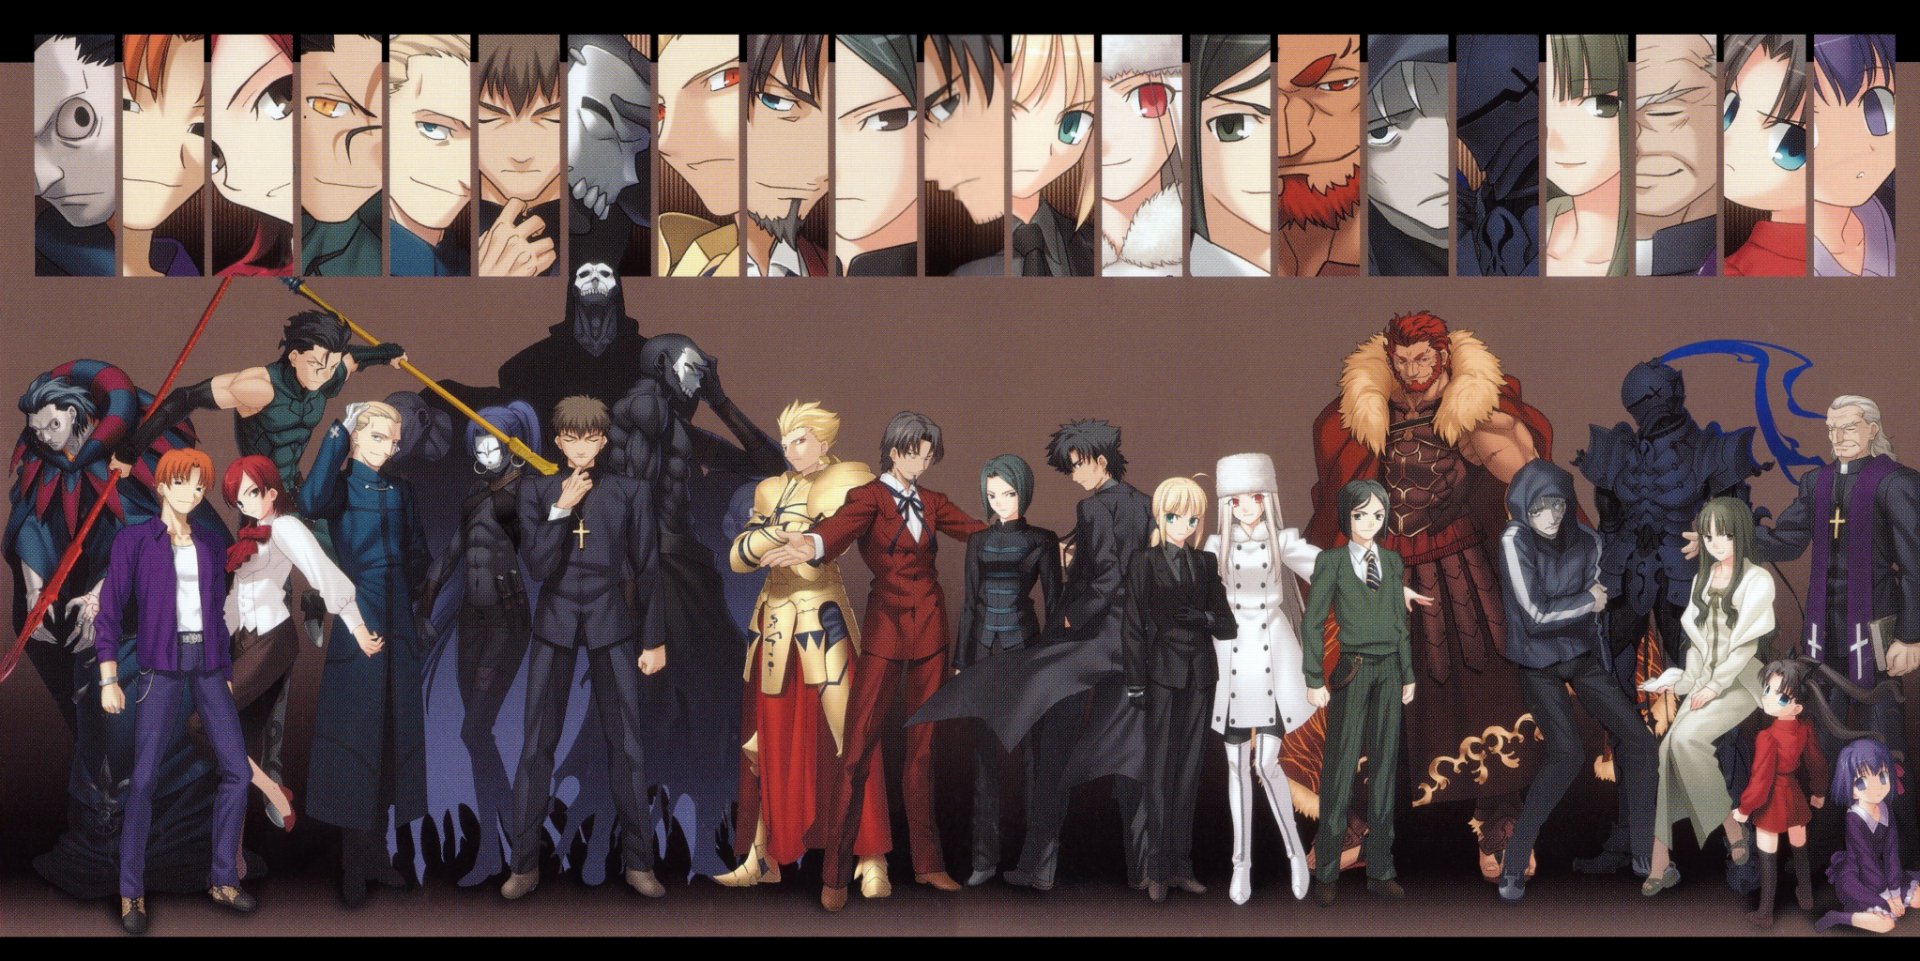 49 Rider Fate Zero Hd Wallpapers Background Images Wallpaper Abyss